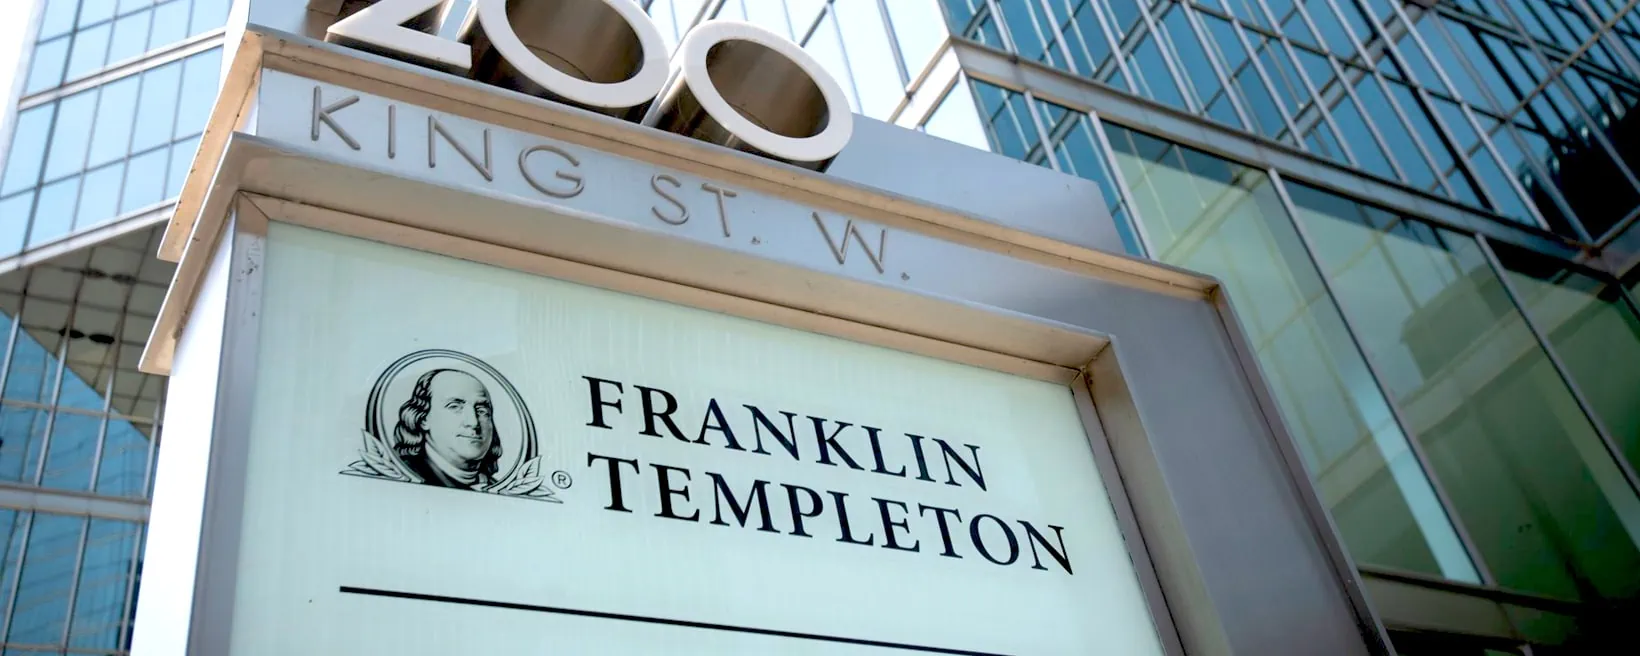 Traditional finance giant Franklin Templeton, with $1.5 trillion AUM, joins the Bitcoin ETF race.